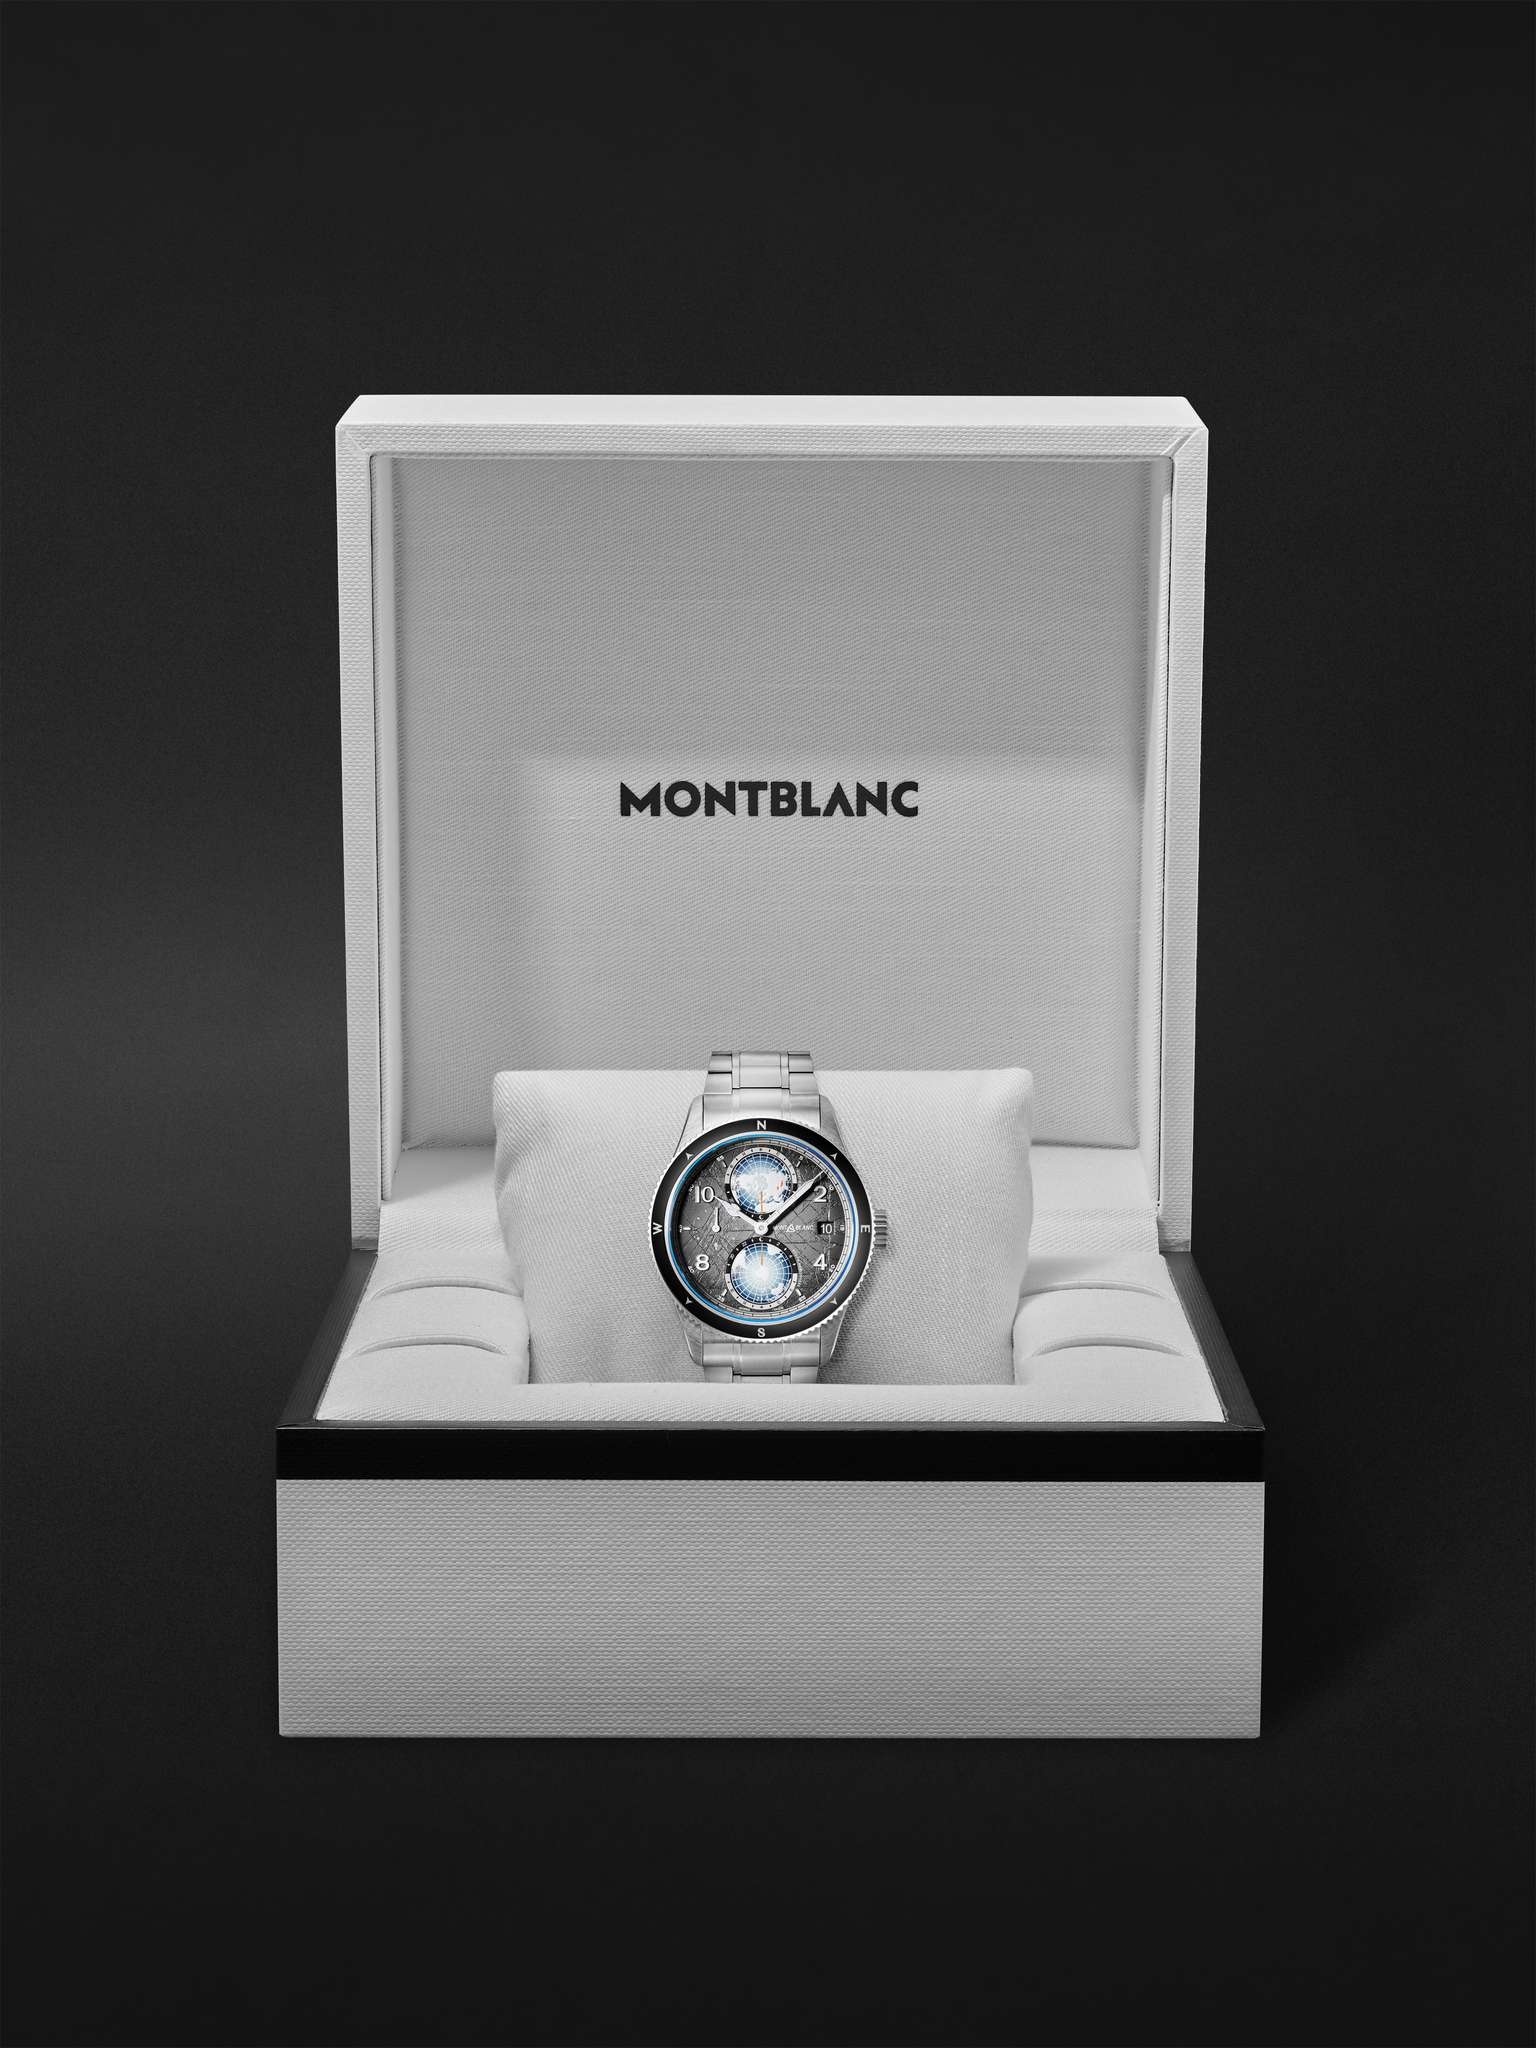 Montblanc 1858 Geosphere 0 Oxygen The 8000 Automatic 42mm Titanium, Ceramic and Stainless Steel Watc - 7